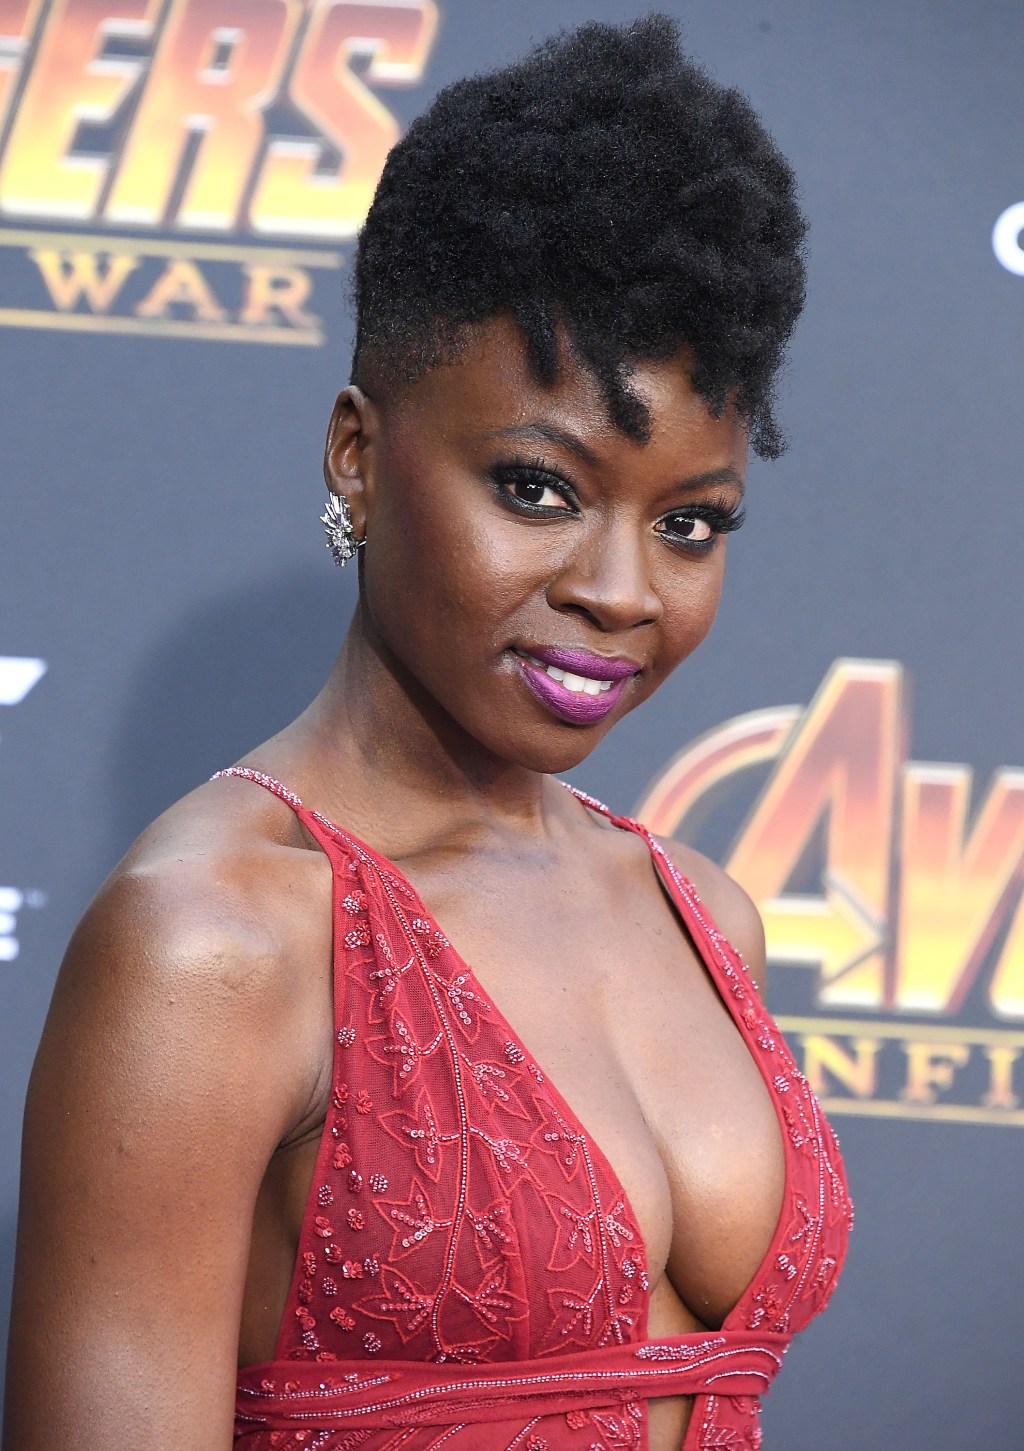 Premiere Of Disney And Marvel's 'Avengers: Infinity War' - Arrivals